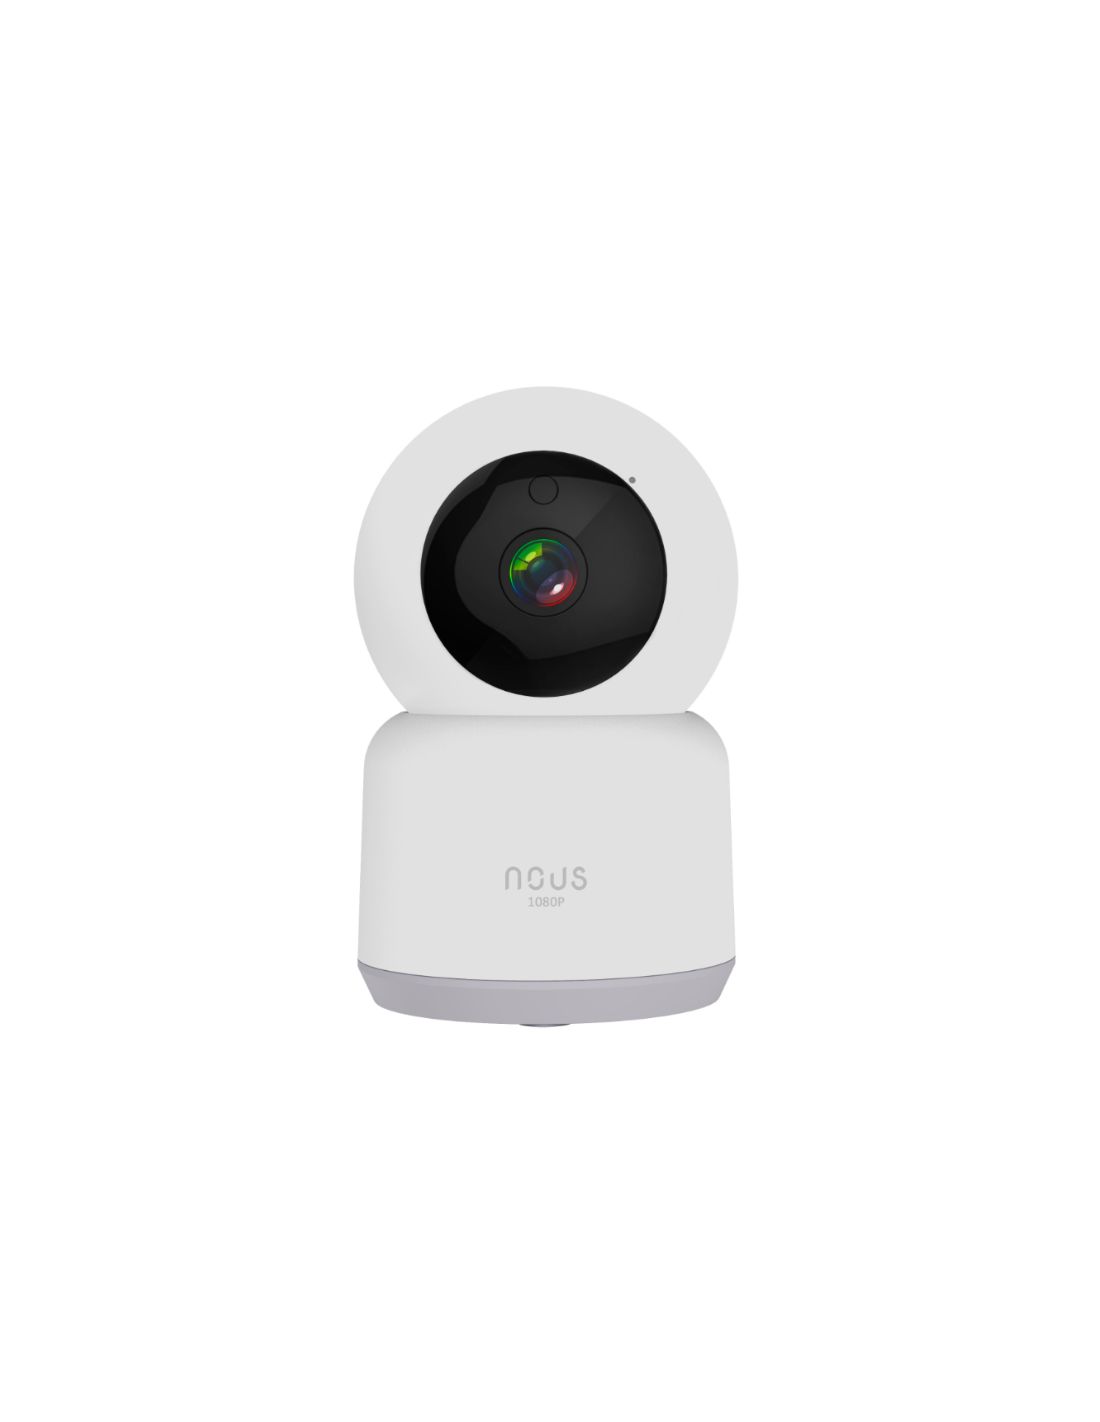 Nous smart sensor for home and smart gateway zigbee for smart home - Nous  technology